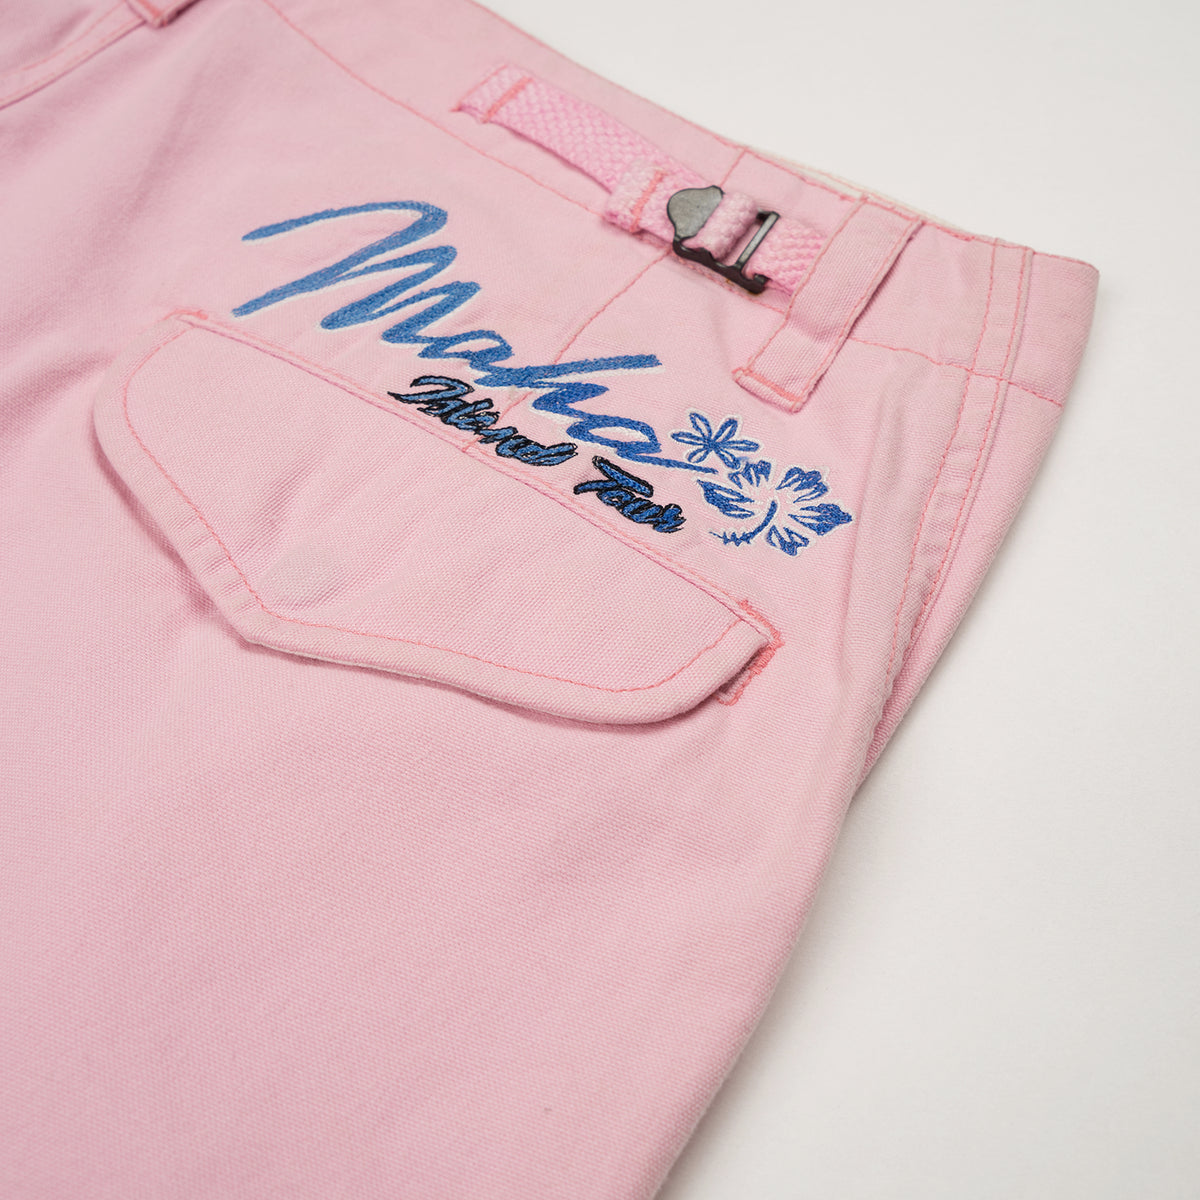 maharishi Miltype Cargo Snoshorts Islands Tour Embroidery Coral Pink - Concrete